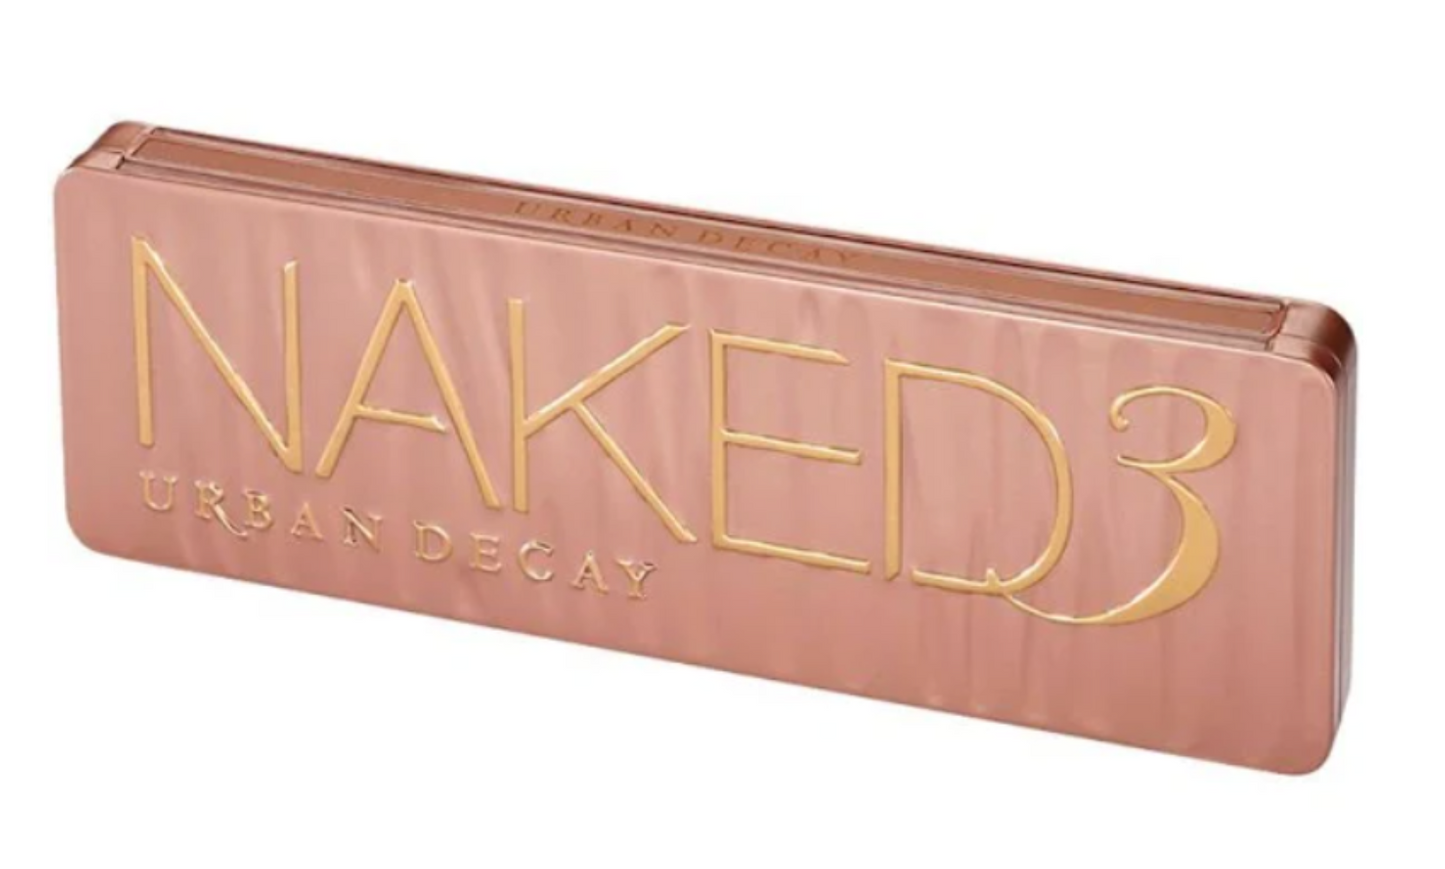 URBAN DECAY NAKED 3 Palette